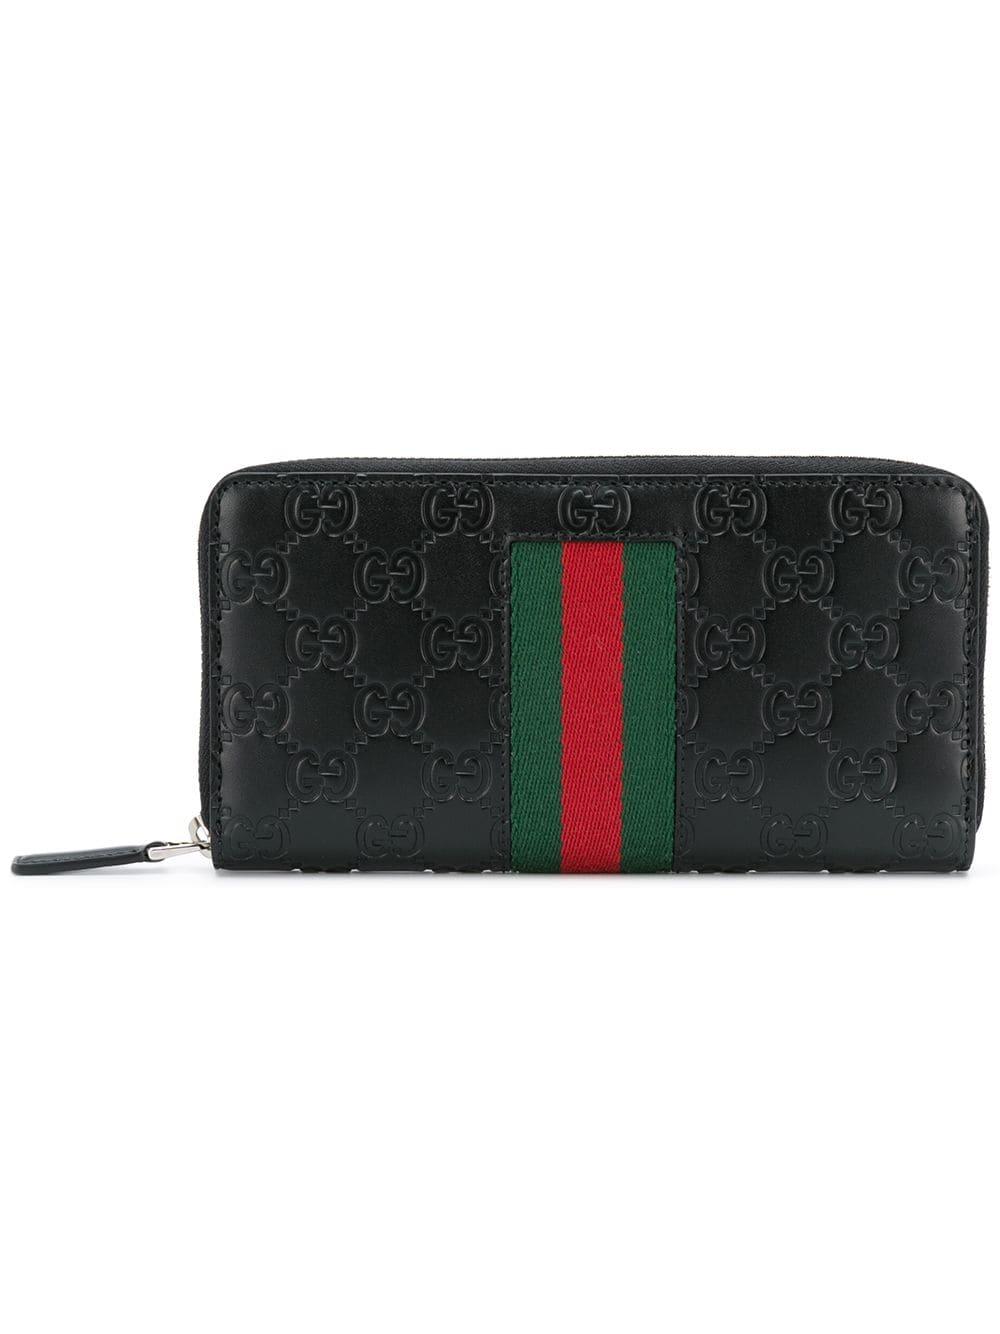 Gucci Leather Signature Web Zip-around Wallet in Black for Men - Lyst